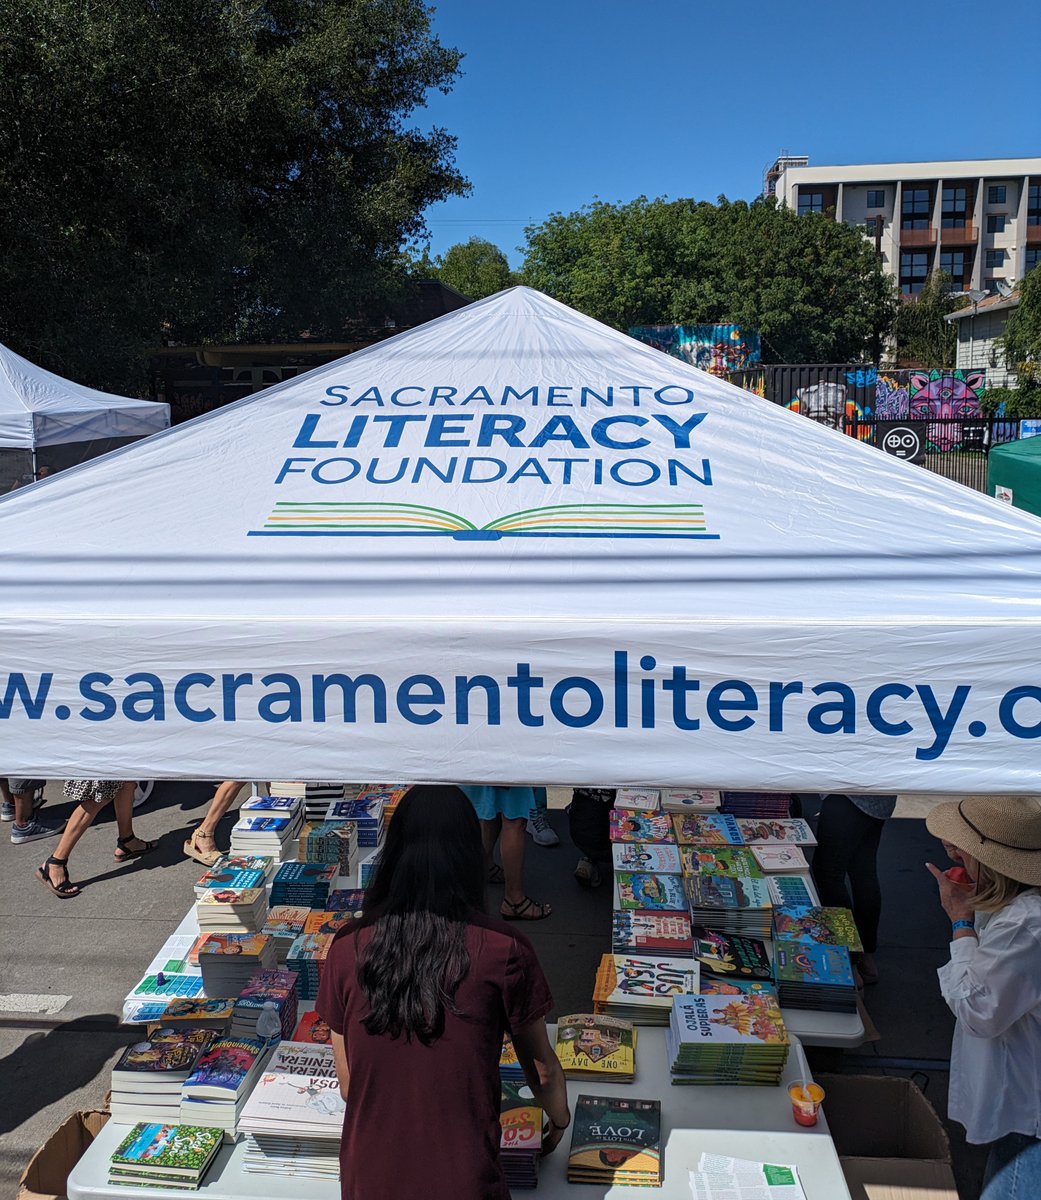 Kudos @SacLiteracy for helping kids develop a love for #reading. I joined the #volunteer crew this past Saturday to #giveaway hundreds of free #kidsbooks! Check out this great #nonprofit, sacramentoliteracy.org
#childrensliteracy #Sacramento #ReadMore #readerscommunity #books